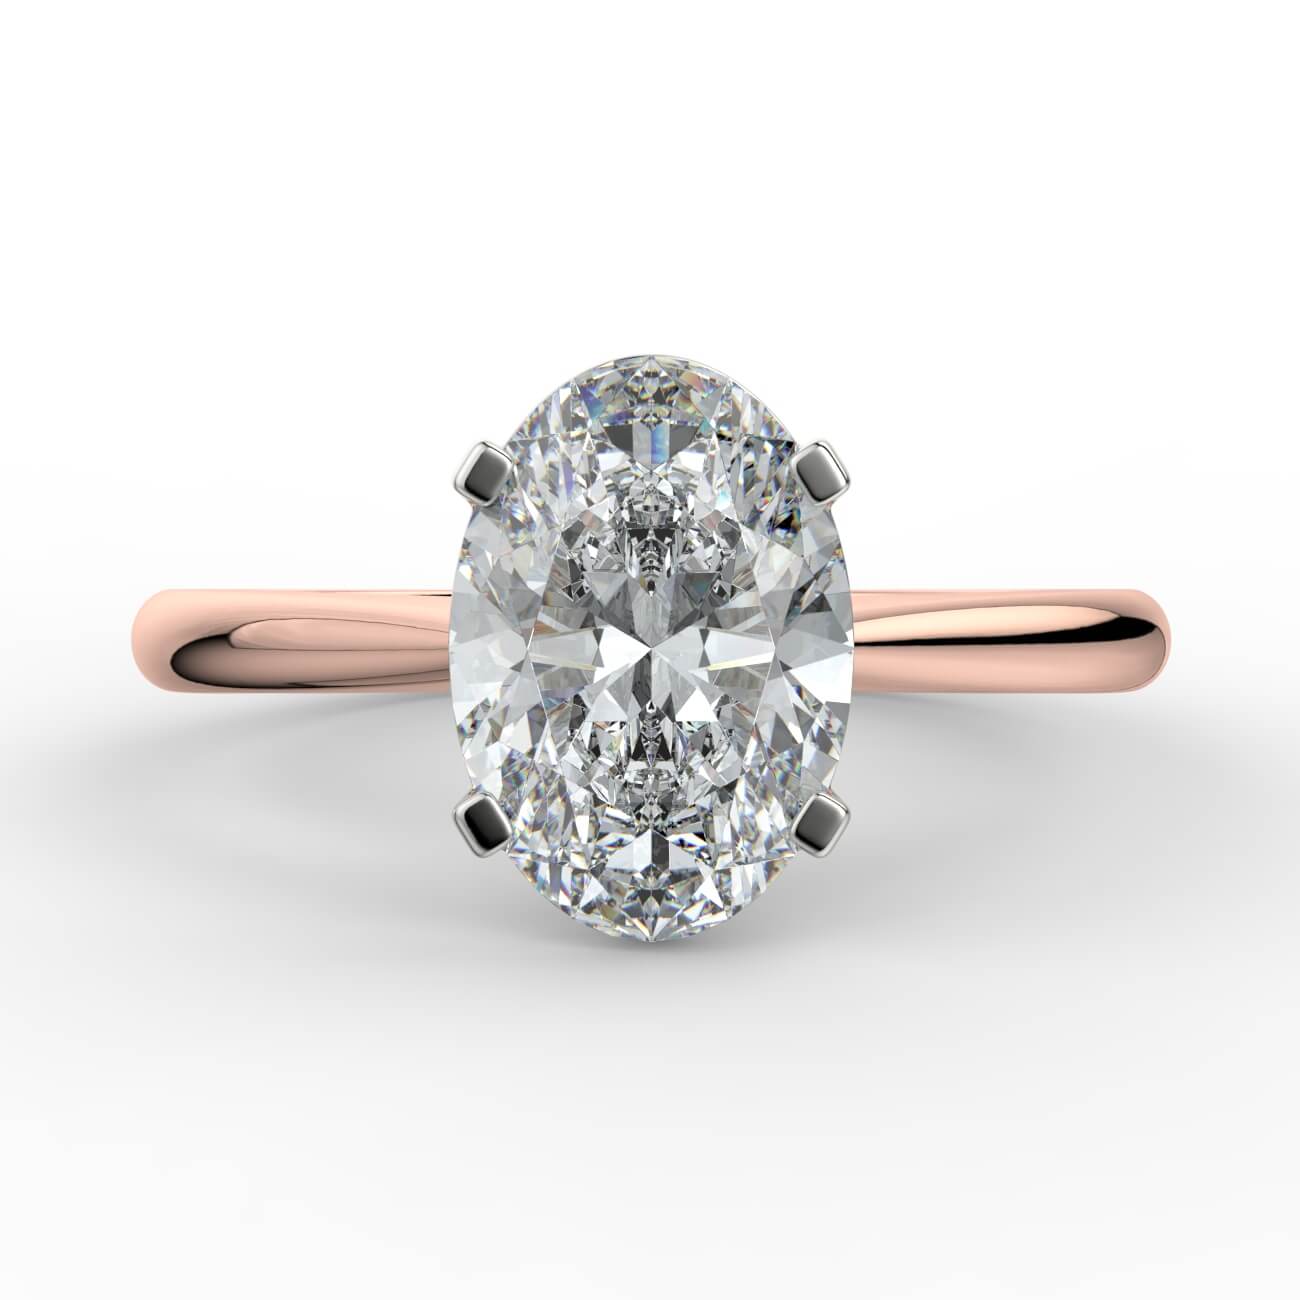 Oval cut diamond cathedral engagement ring in white and rose gold – Australian Diamond Network